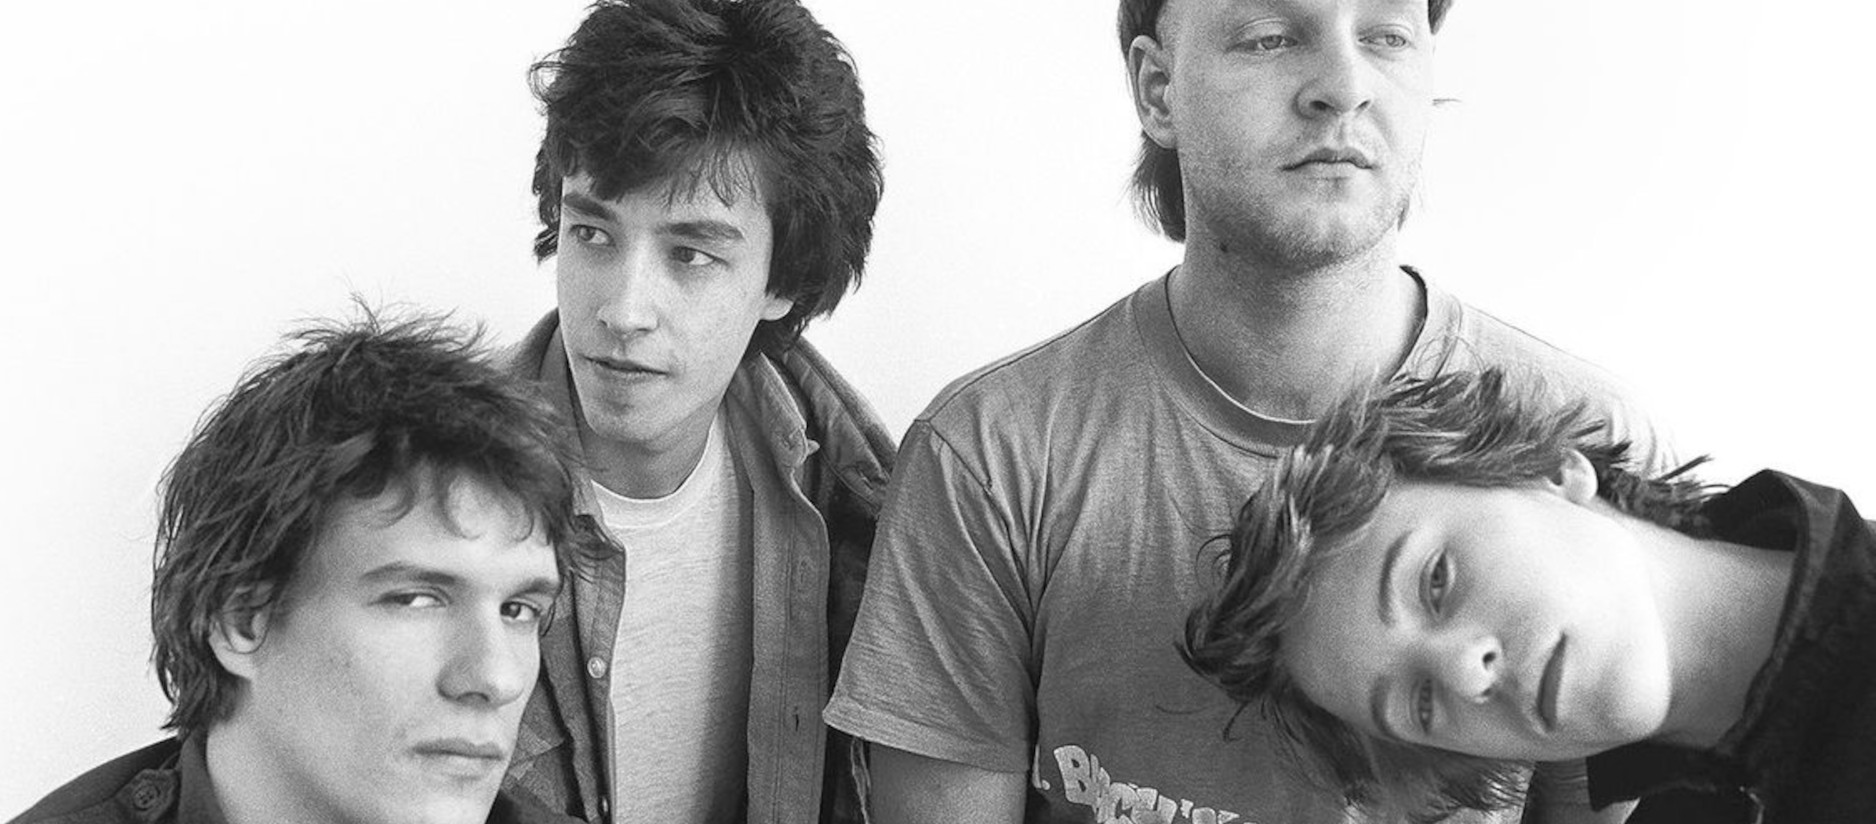 The Replacements Release New Animated Video Ahead of LP 40th Anniversary